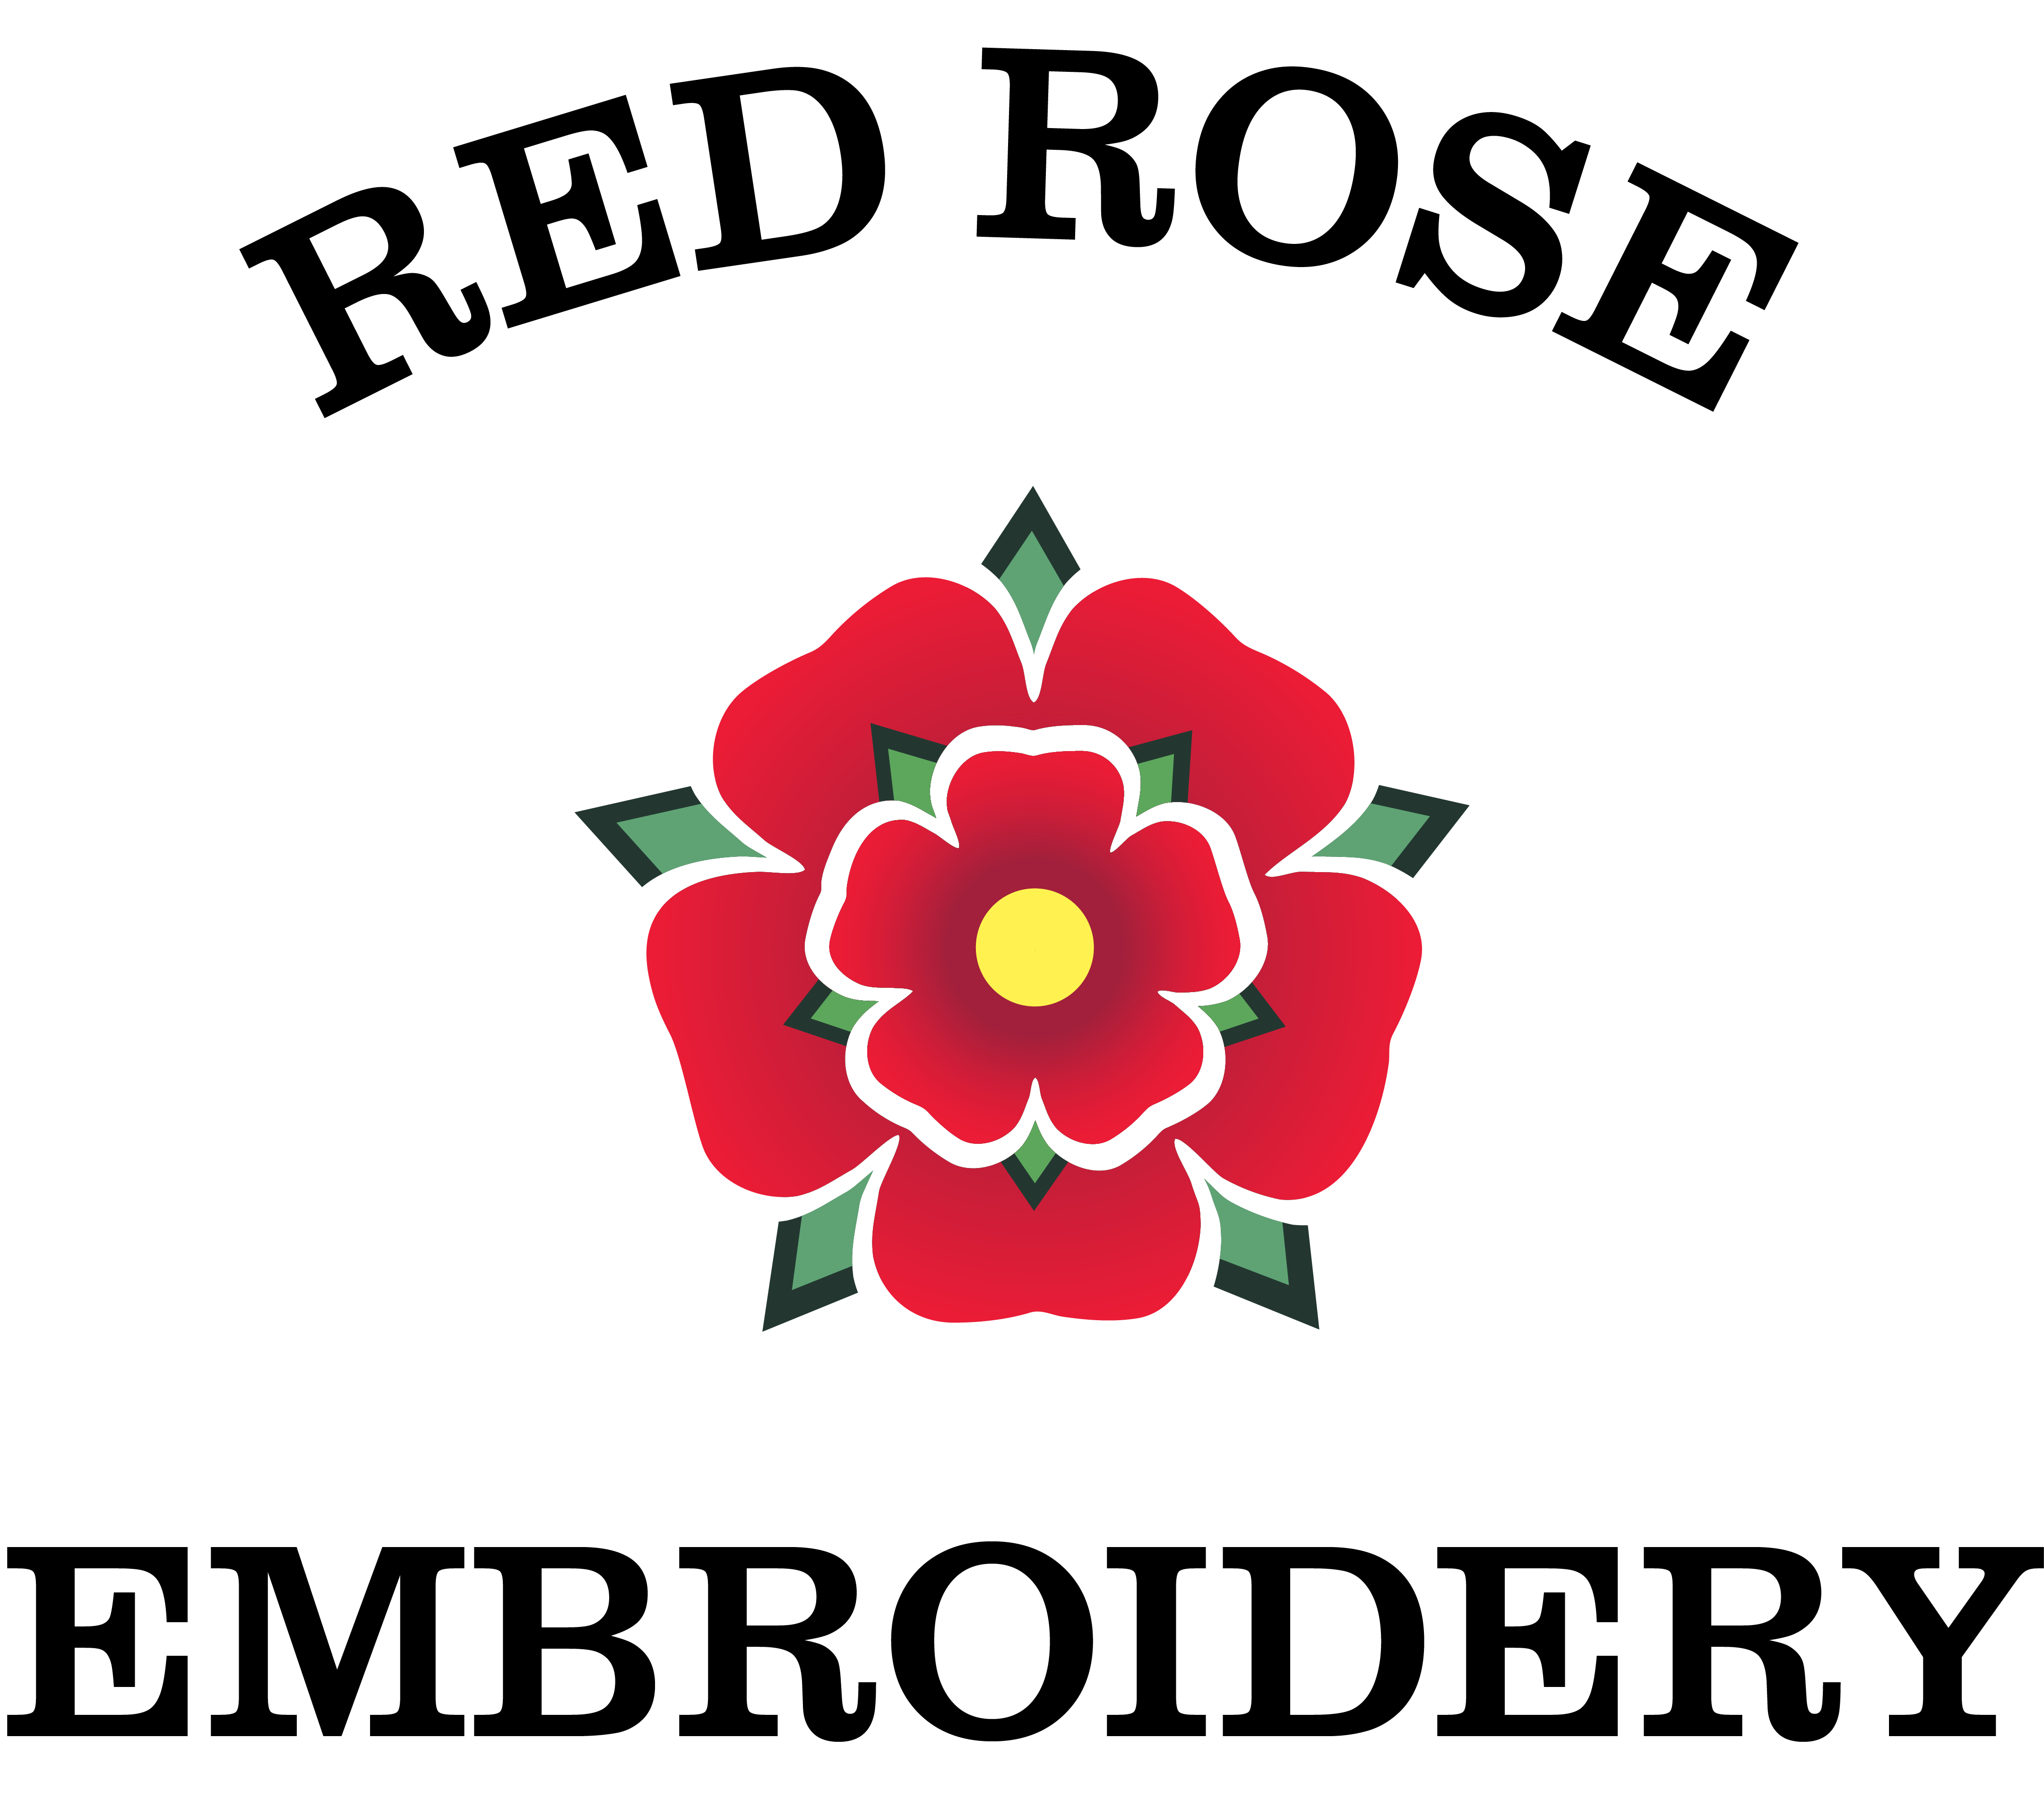 Red Rose Embroidery - Custom Embroidered Apparel Lancashire